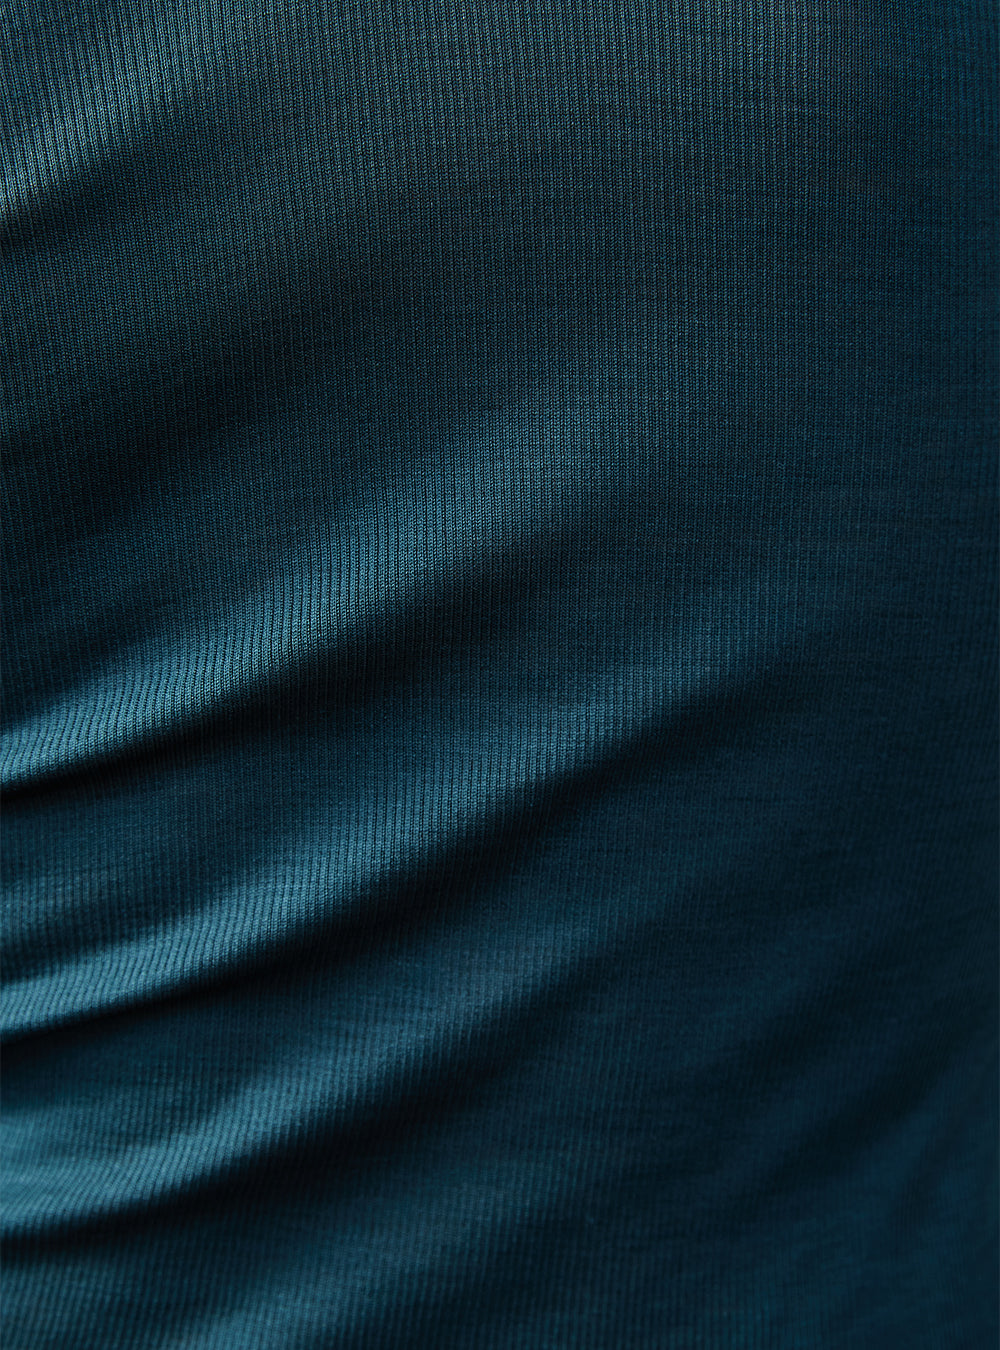 LUCY -Double V Sleeve-【Teal Moss】